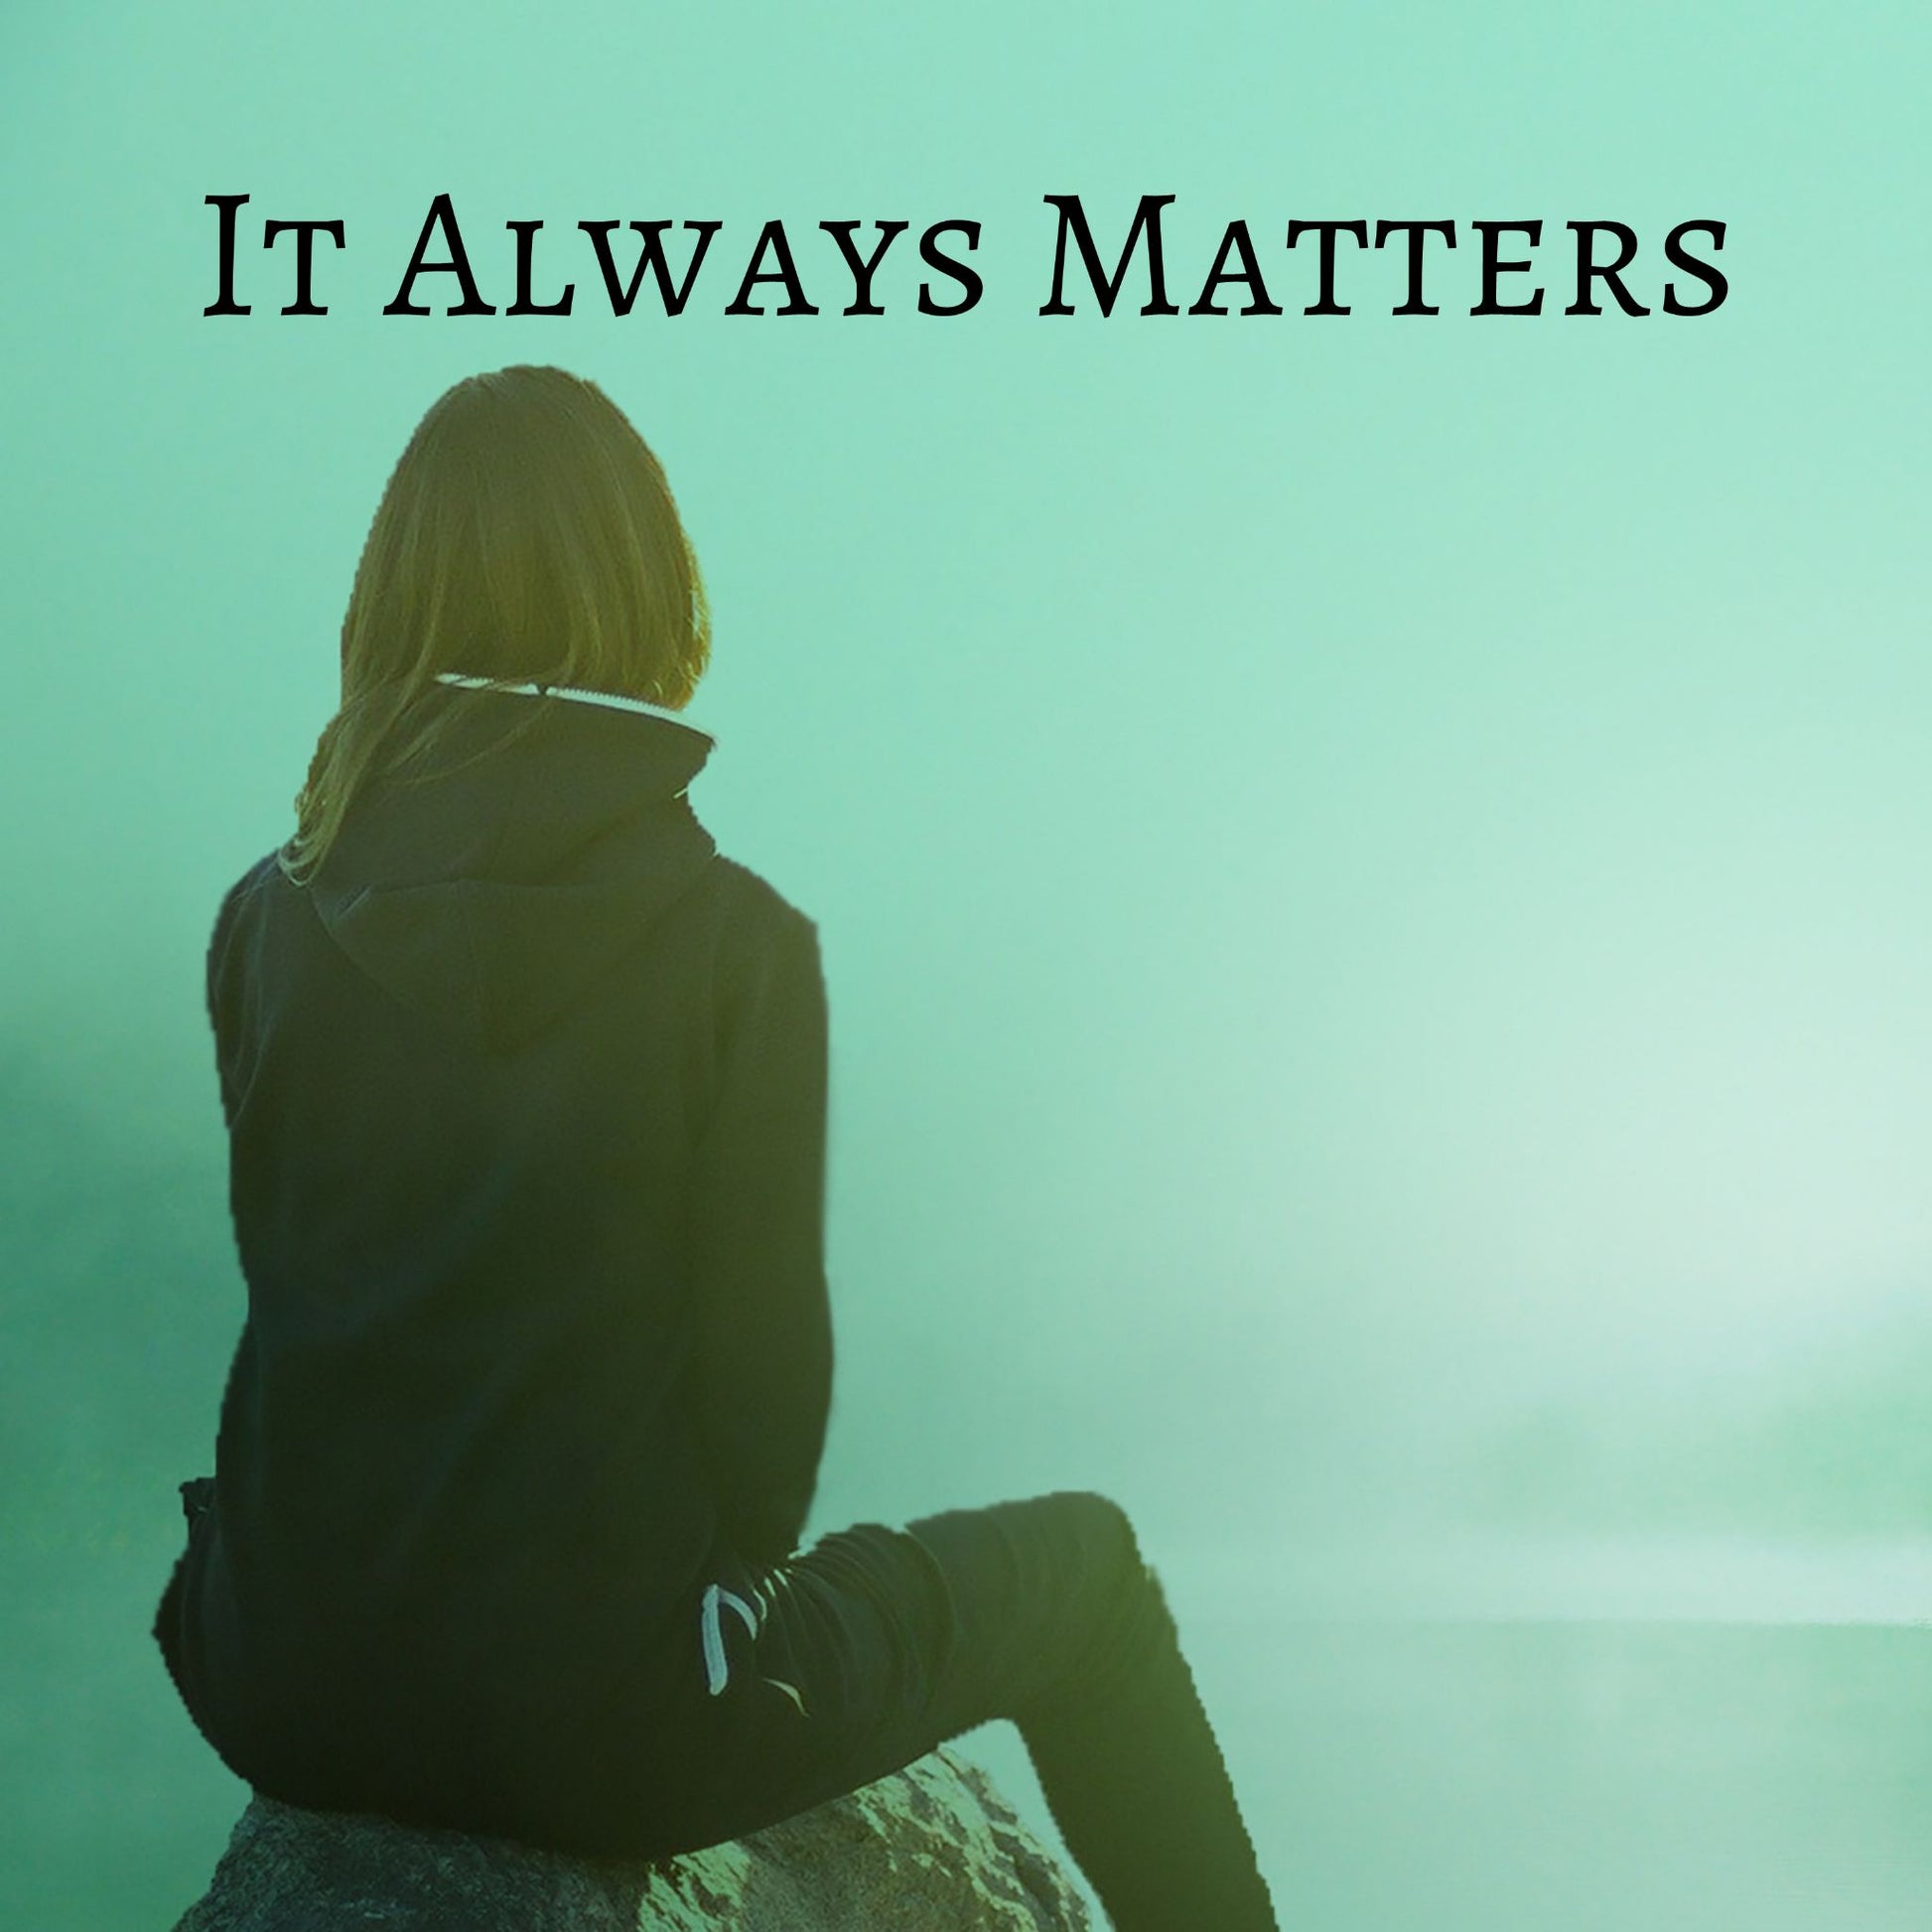 CD Cover of song It Always Matters